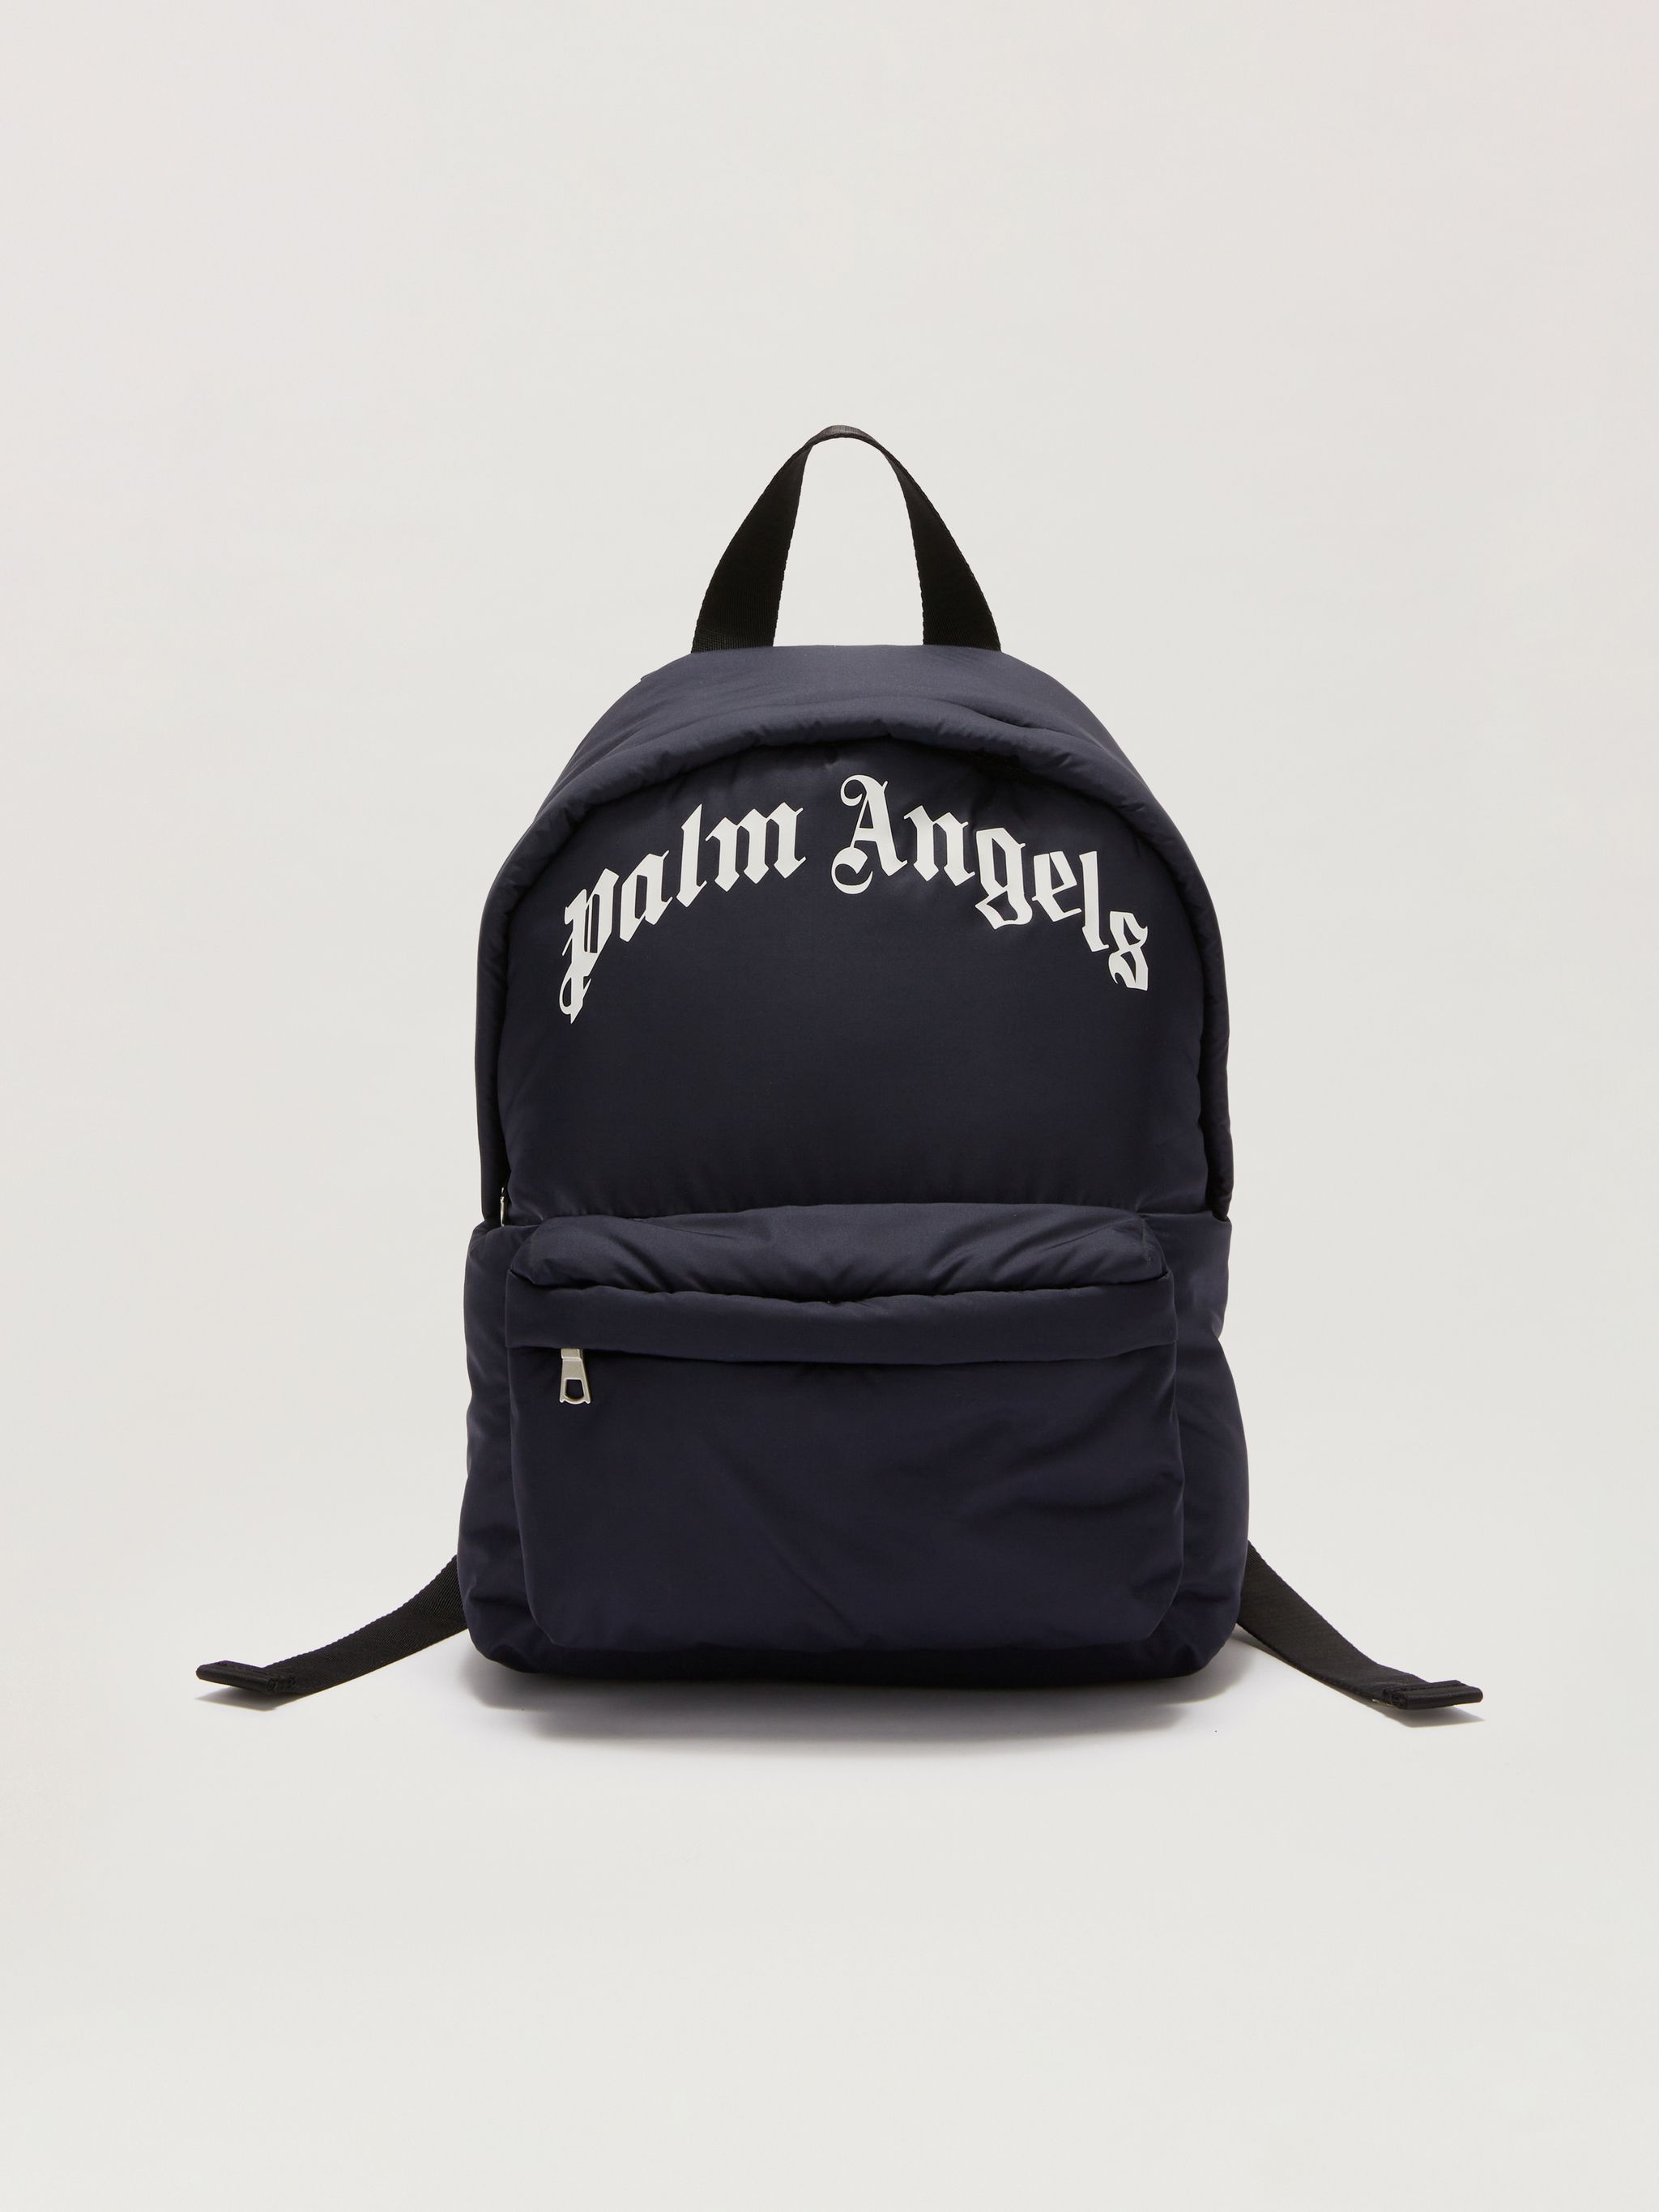 LITTLE CURVED LOGO BACKPACK in blue - Palm Angels® Official